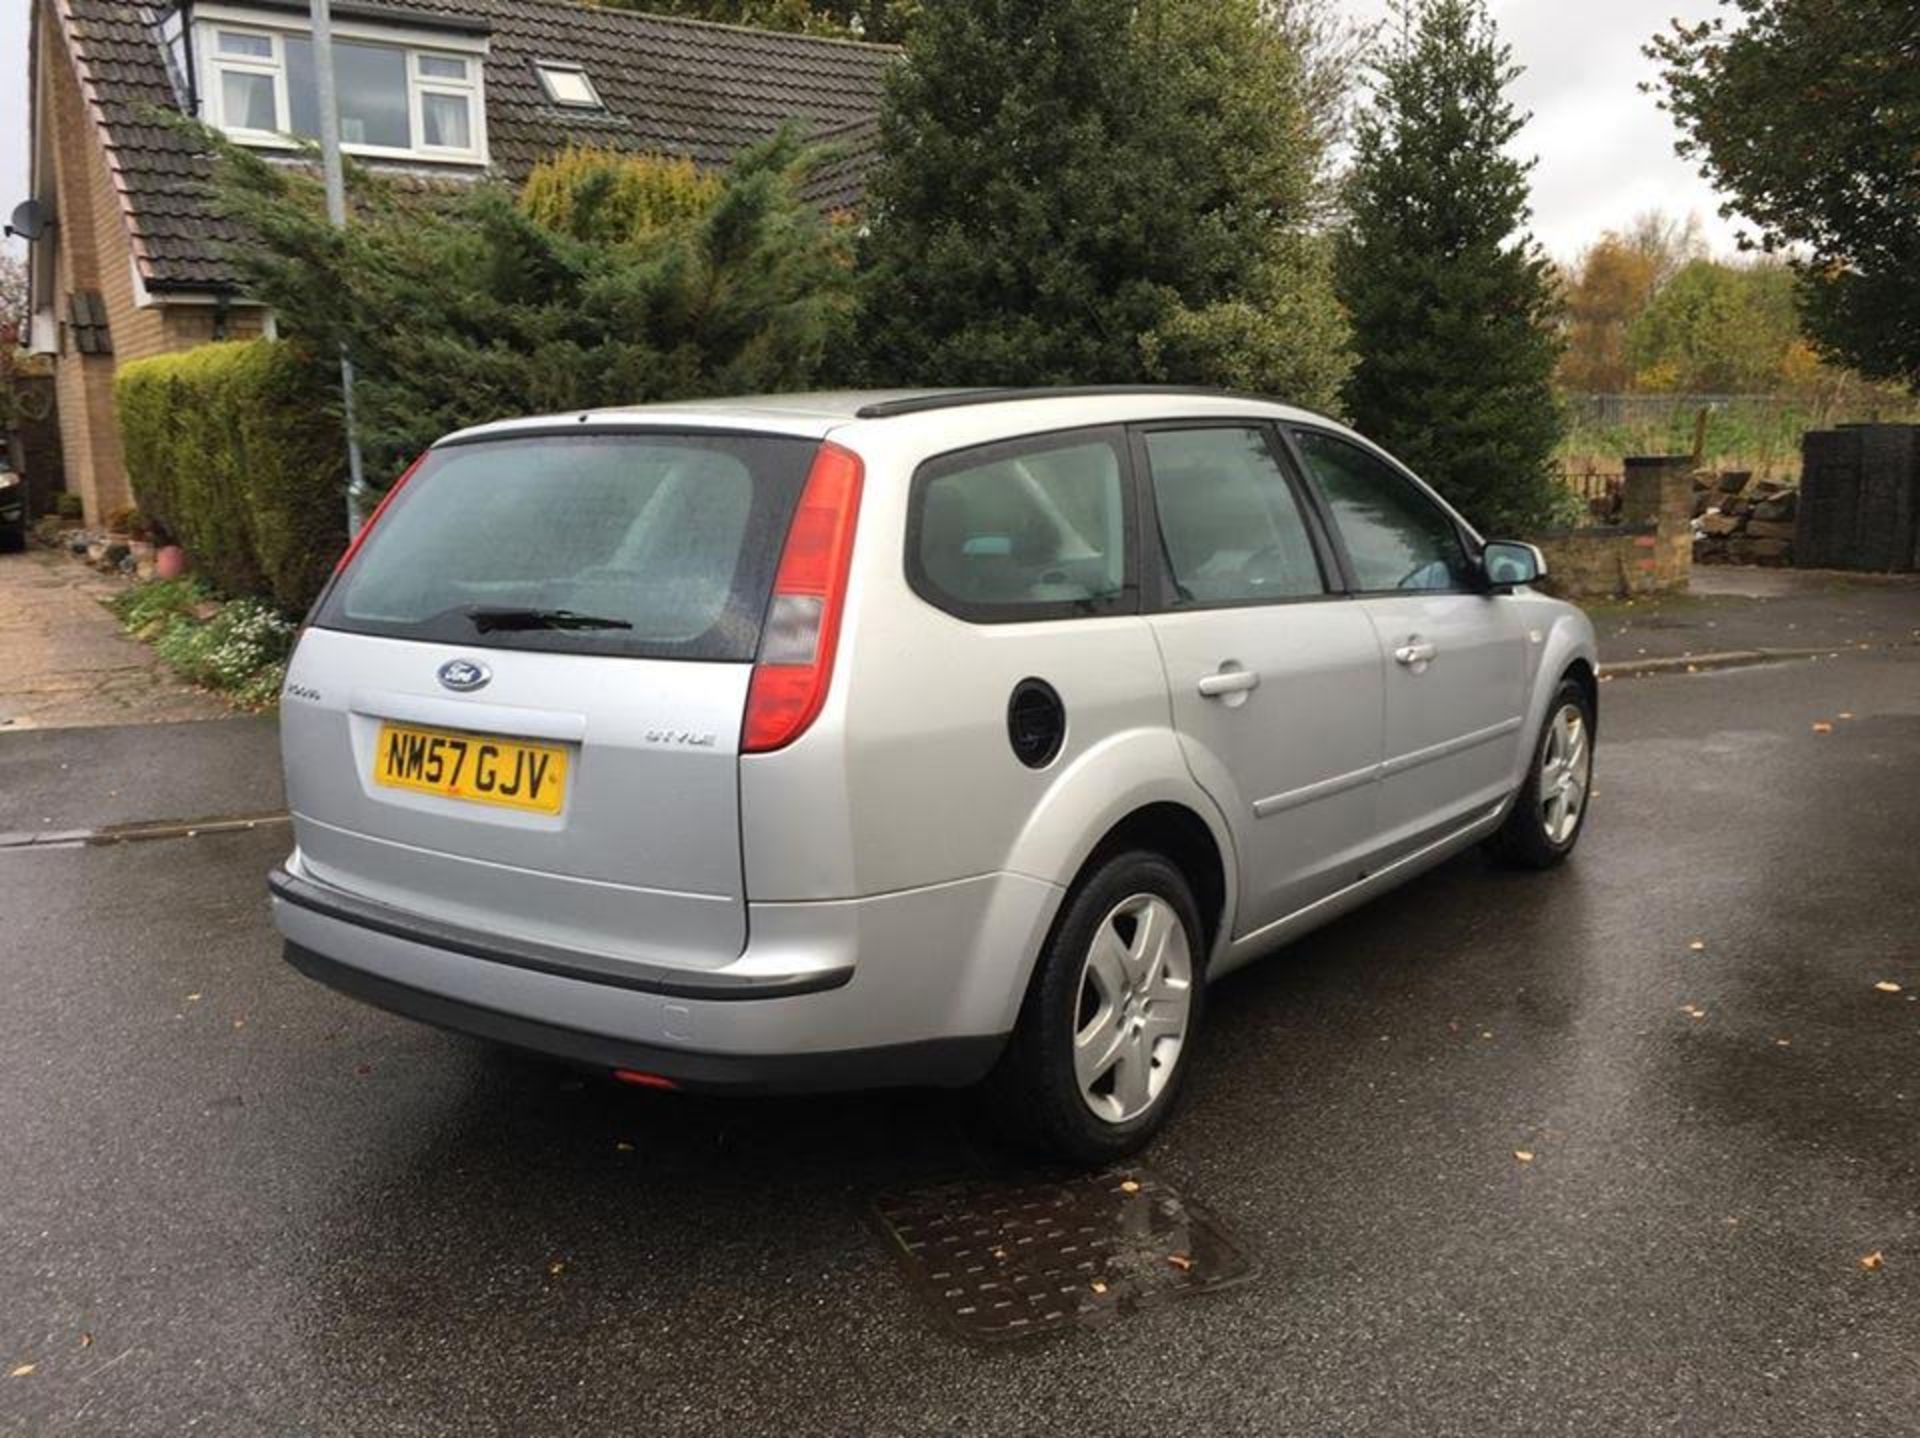 2008/57 PLATE FORD FOCUS 1.6 PETROL STYLE ESTATE, 91K MILES. MOT JULY 2017. - Image 3 of 12